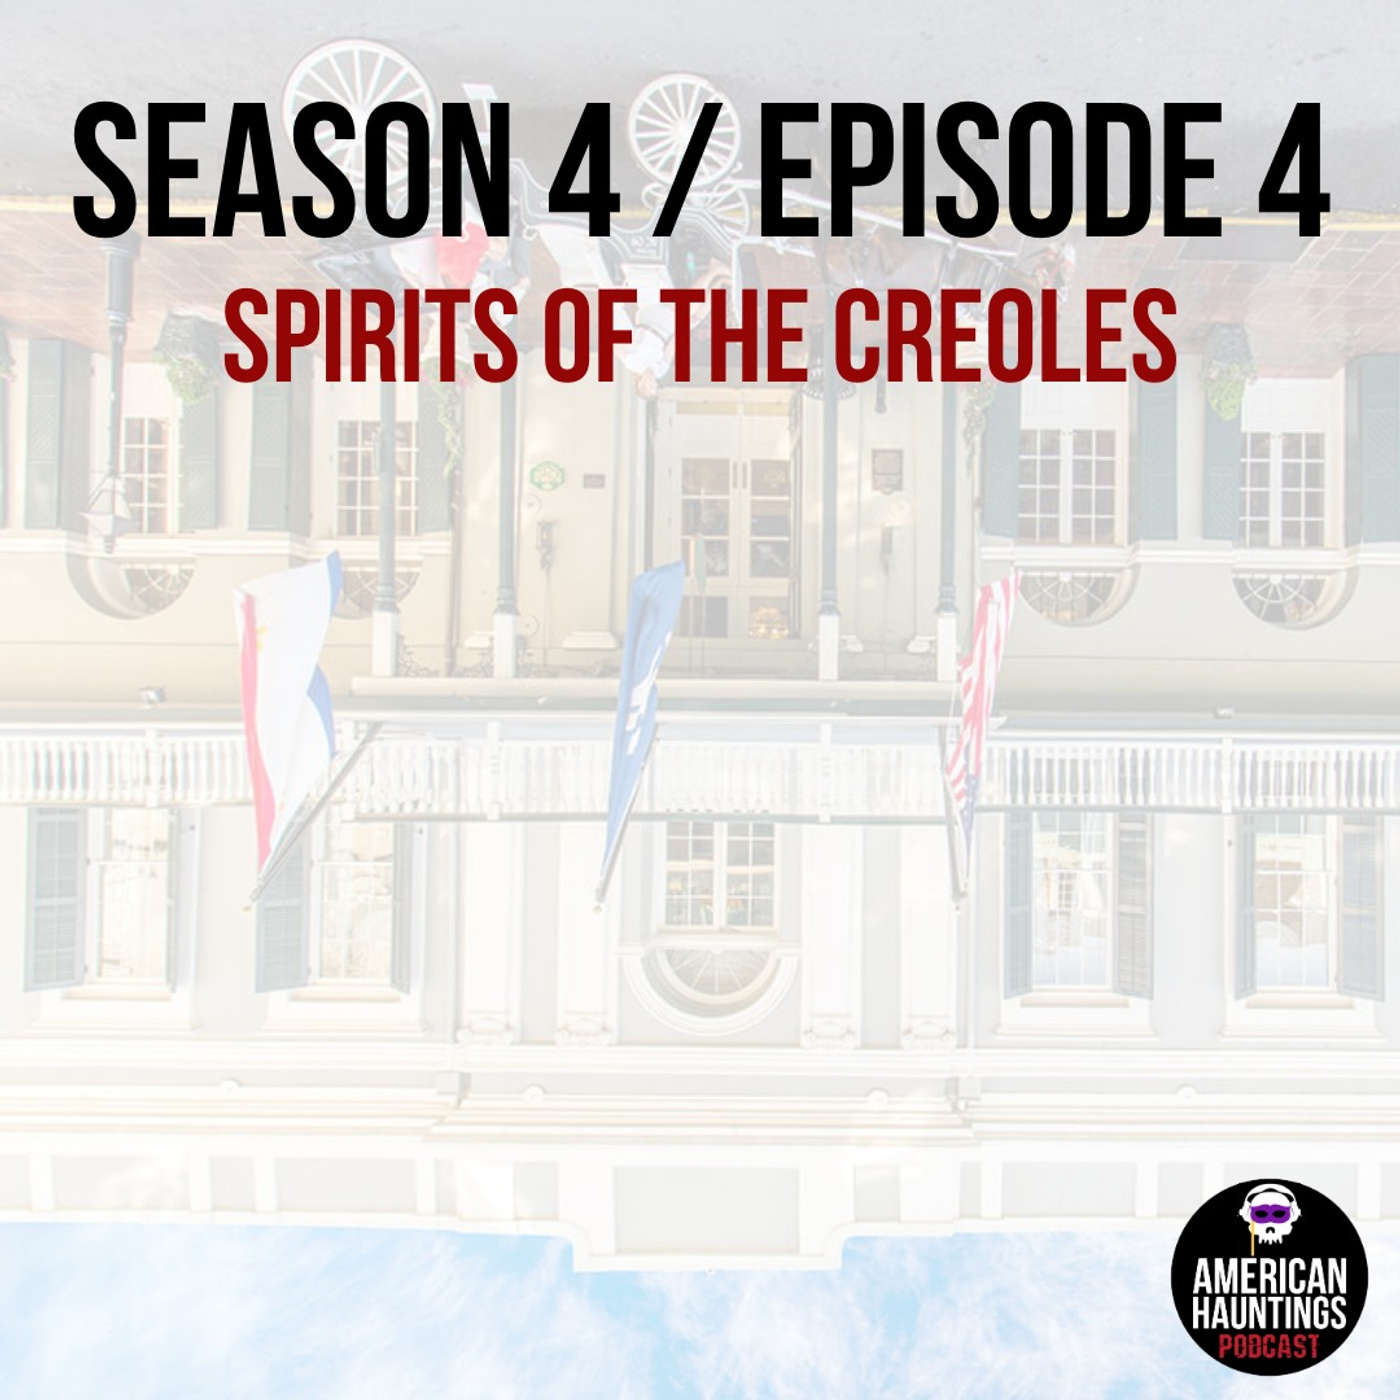 Spirits of the Creoles & The Bourbon Orleans Hotel